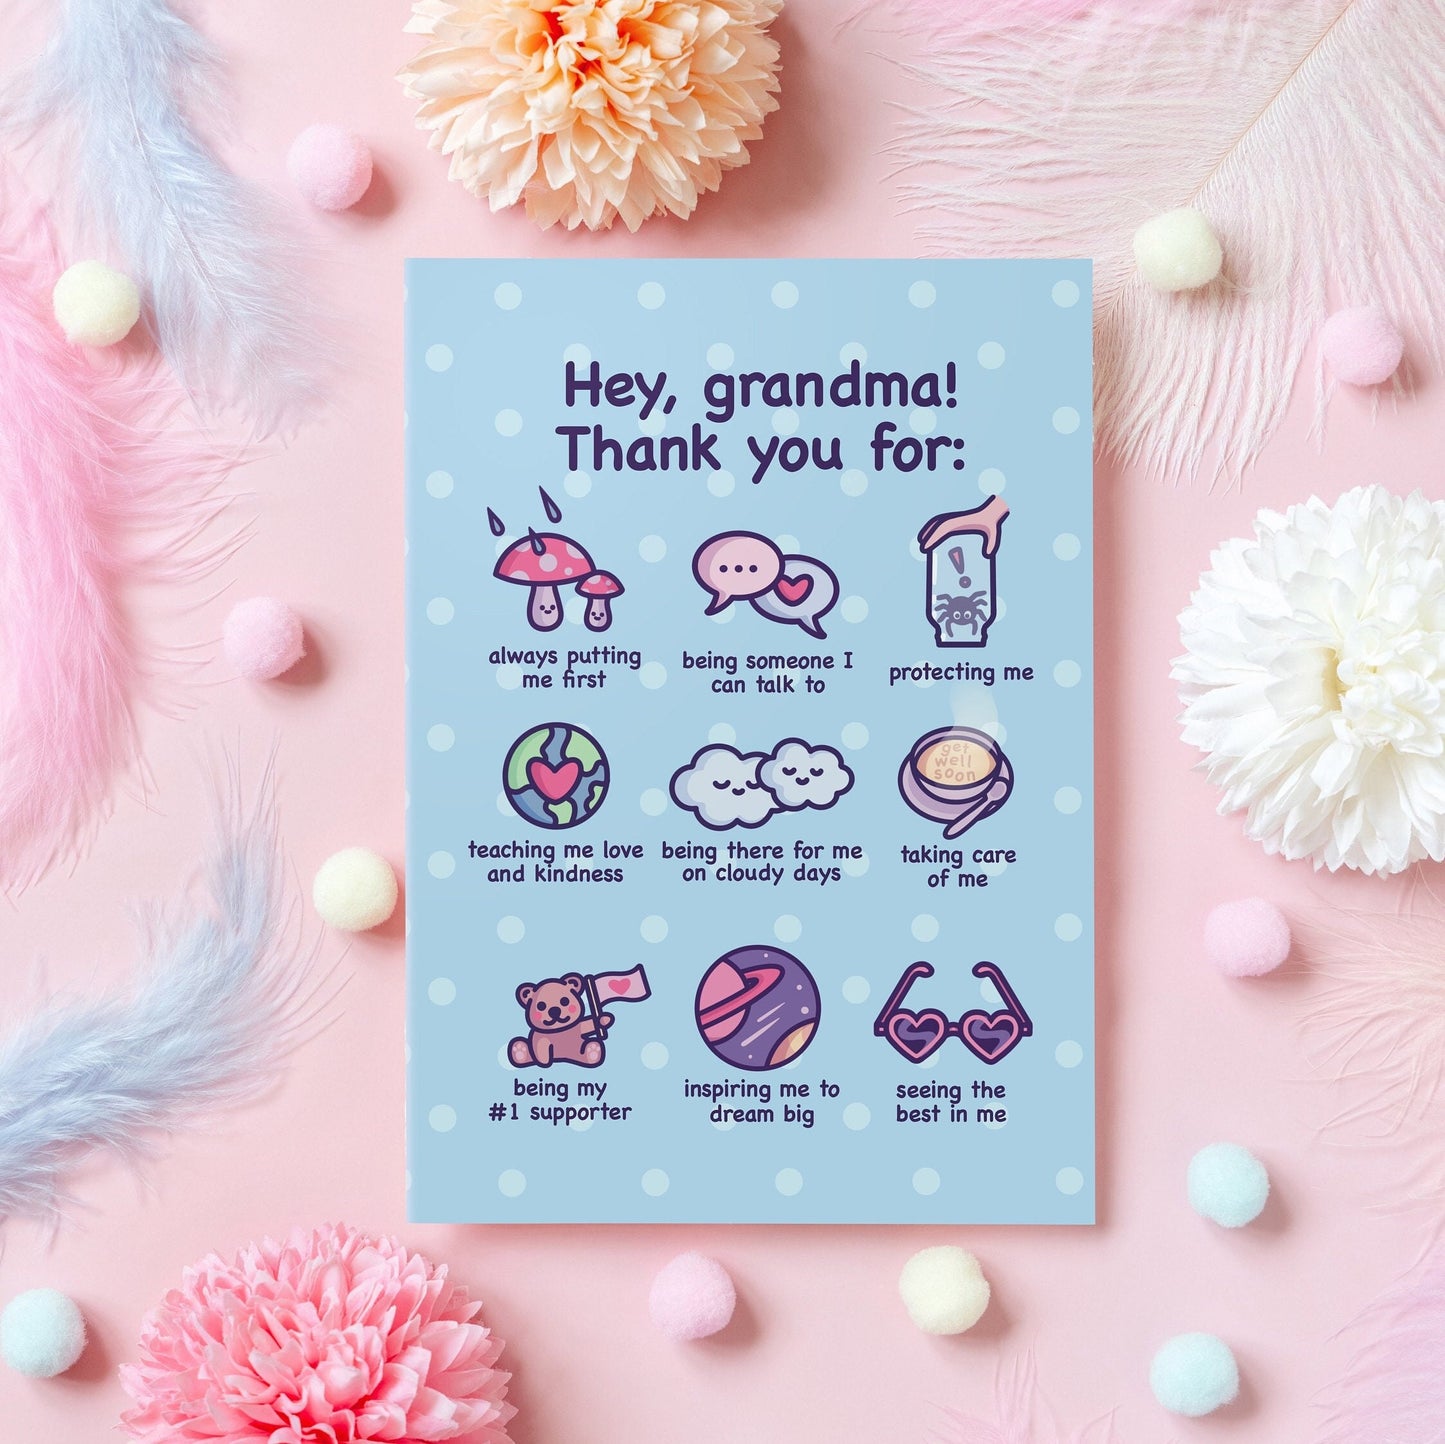 Cute Card for Grandma | Thank You, Grandma! | Card for Grandparents' Day | Wholesome Handmade Gift for Grandmother